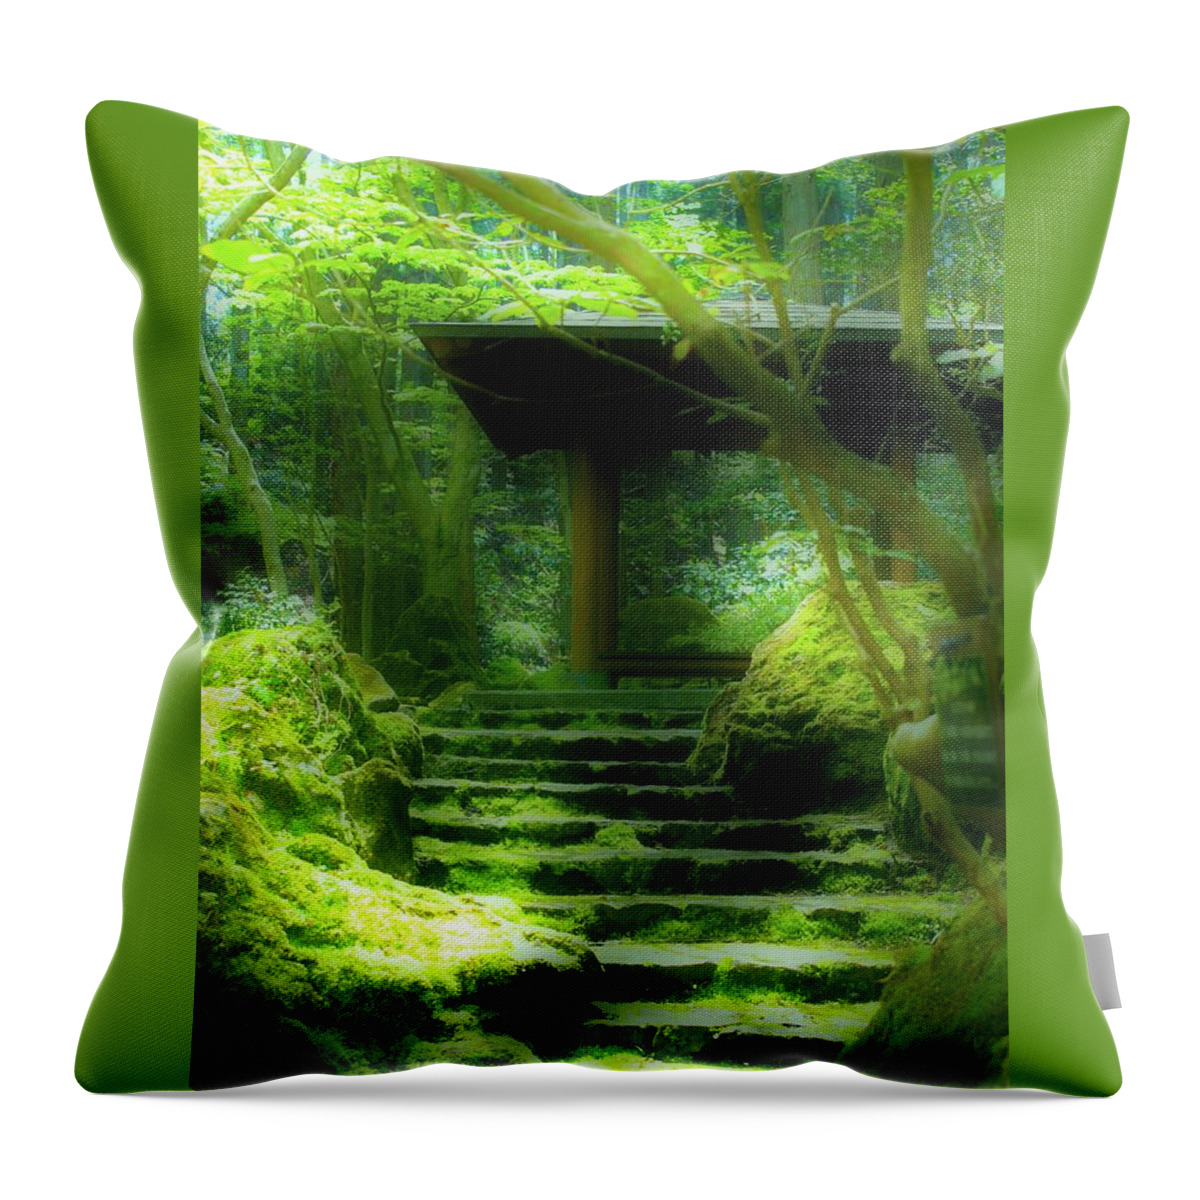 Green Throw Pillow featuring the photograph The Emerald Stairs by Tim Ernst